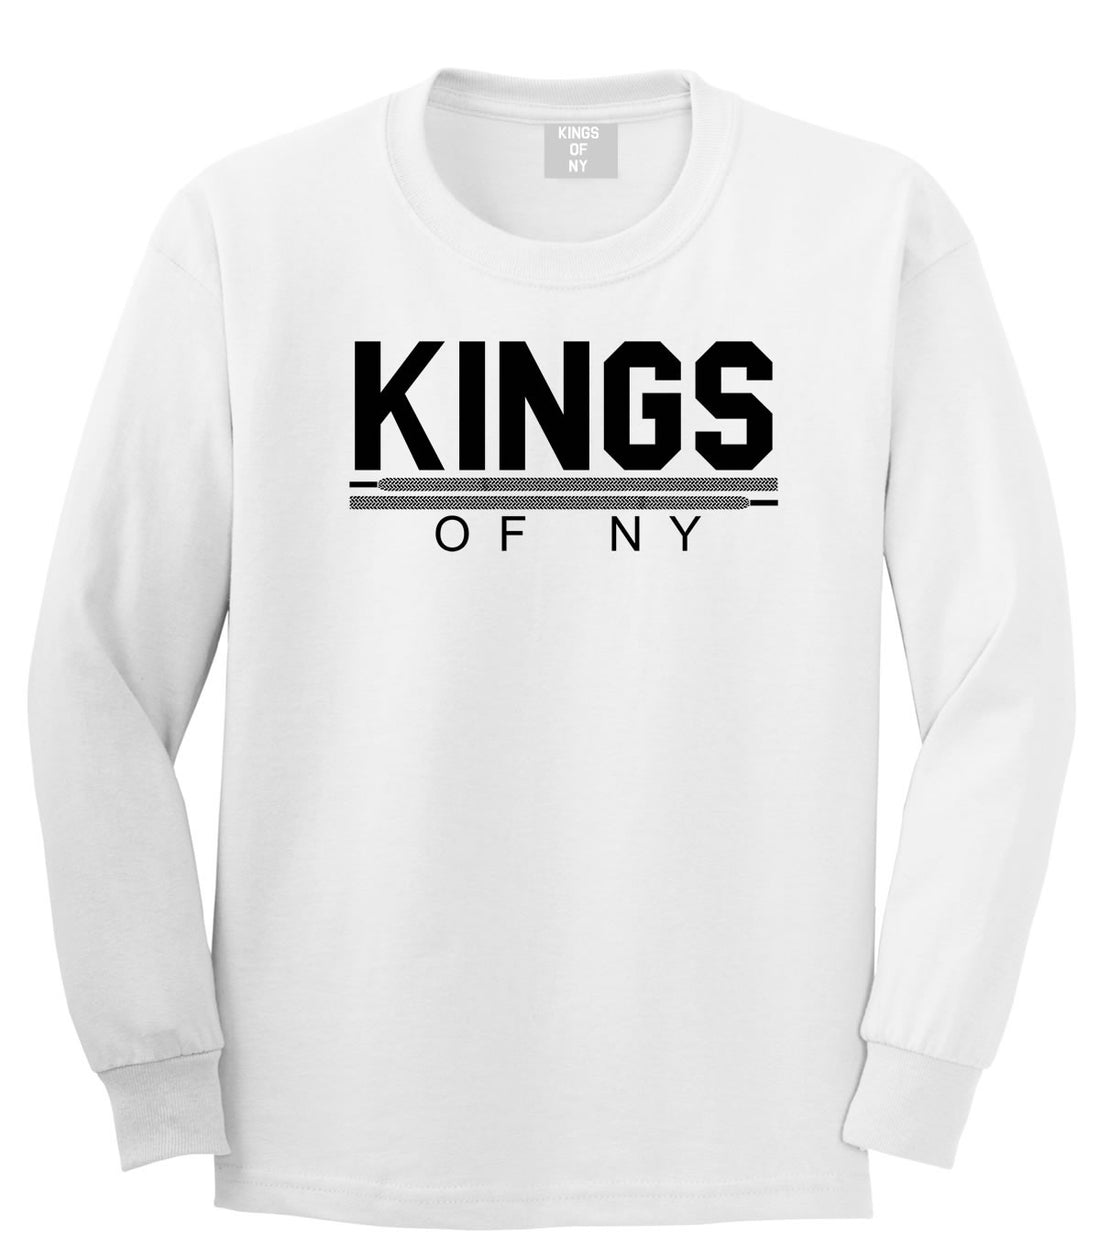 Kings Of NY Laces Long Sleeve T-Shirt in White By Kings Of NY